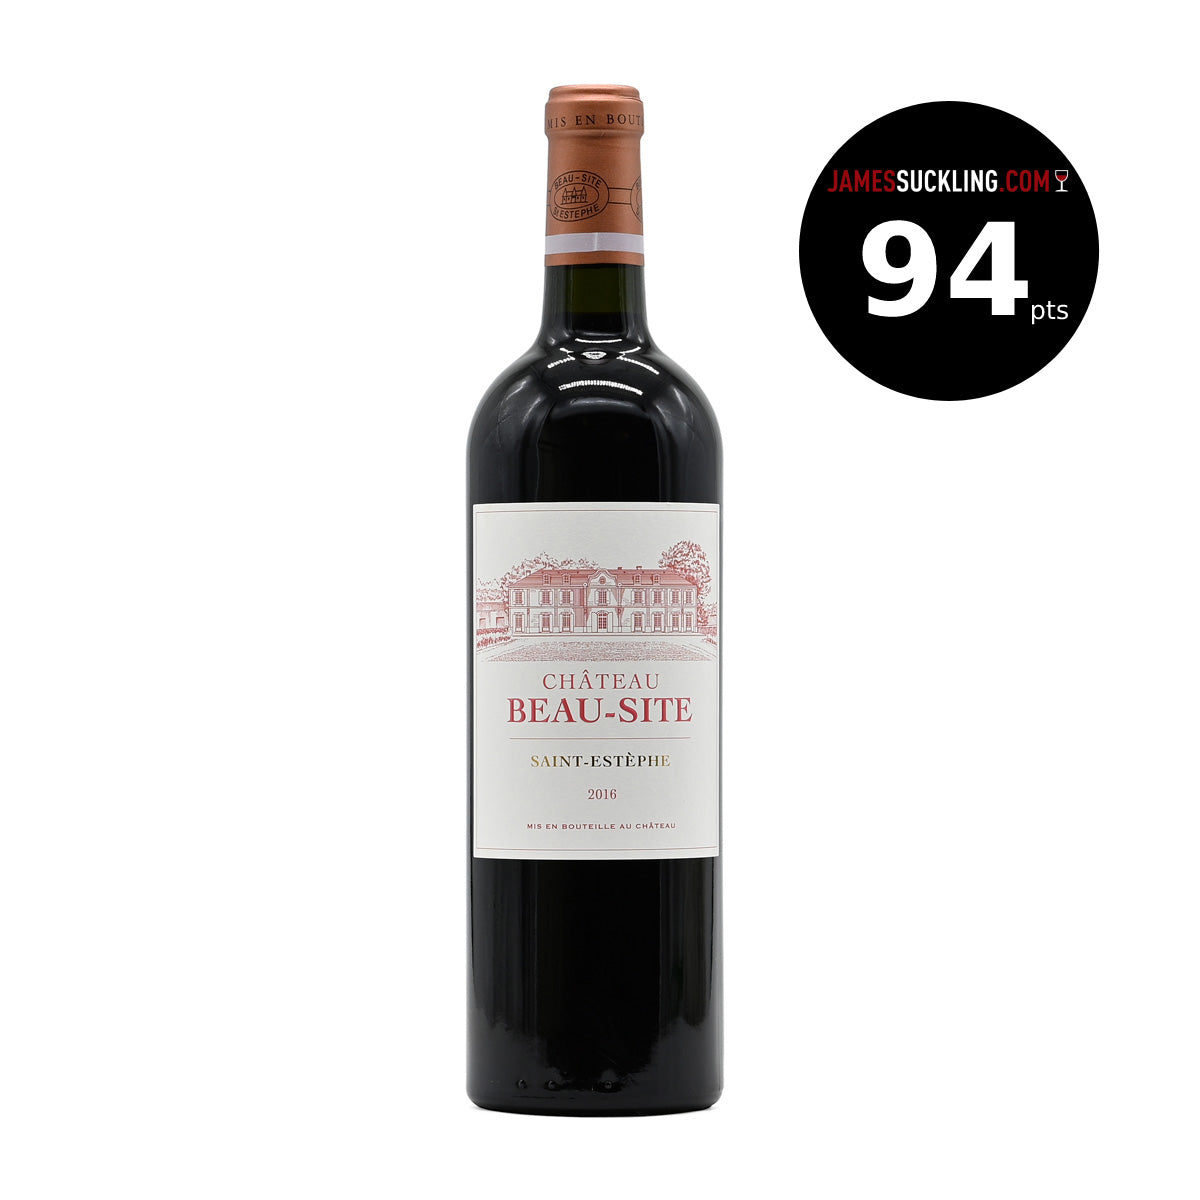 Château Beau-Site 2016, 750ml French red wine, made from a blend of Cabernet Sauvignon, Merlot, Petit Verdot, and Cabernet Franc, from Sanit-Estephe, Bordeaux, France – GDV Fine Wines, Hong Kong